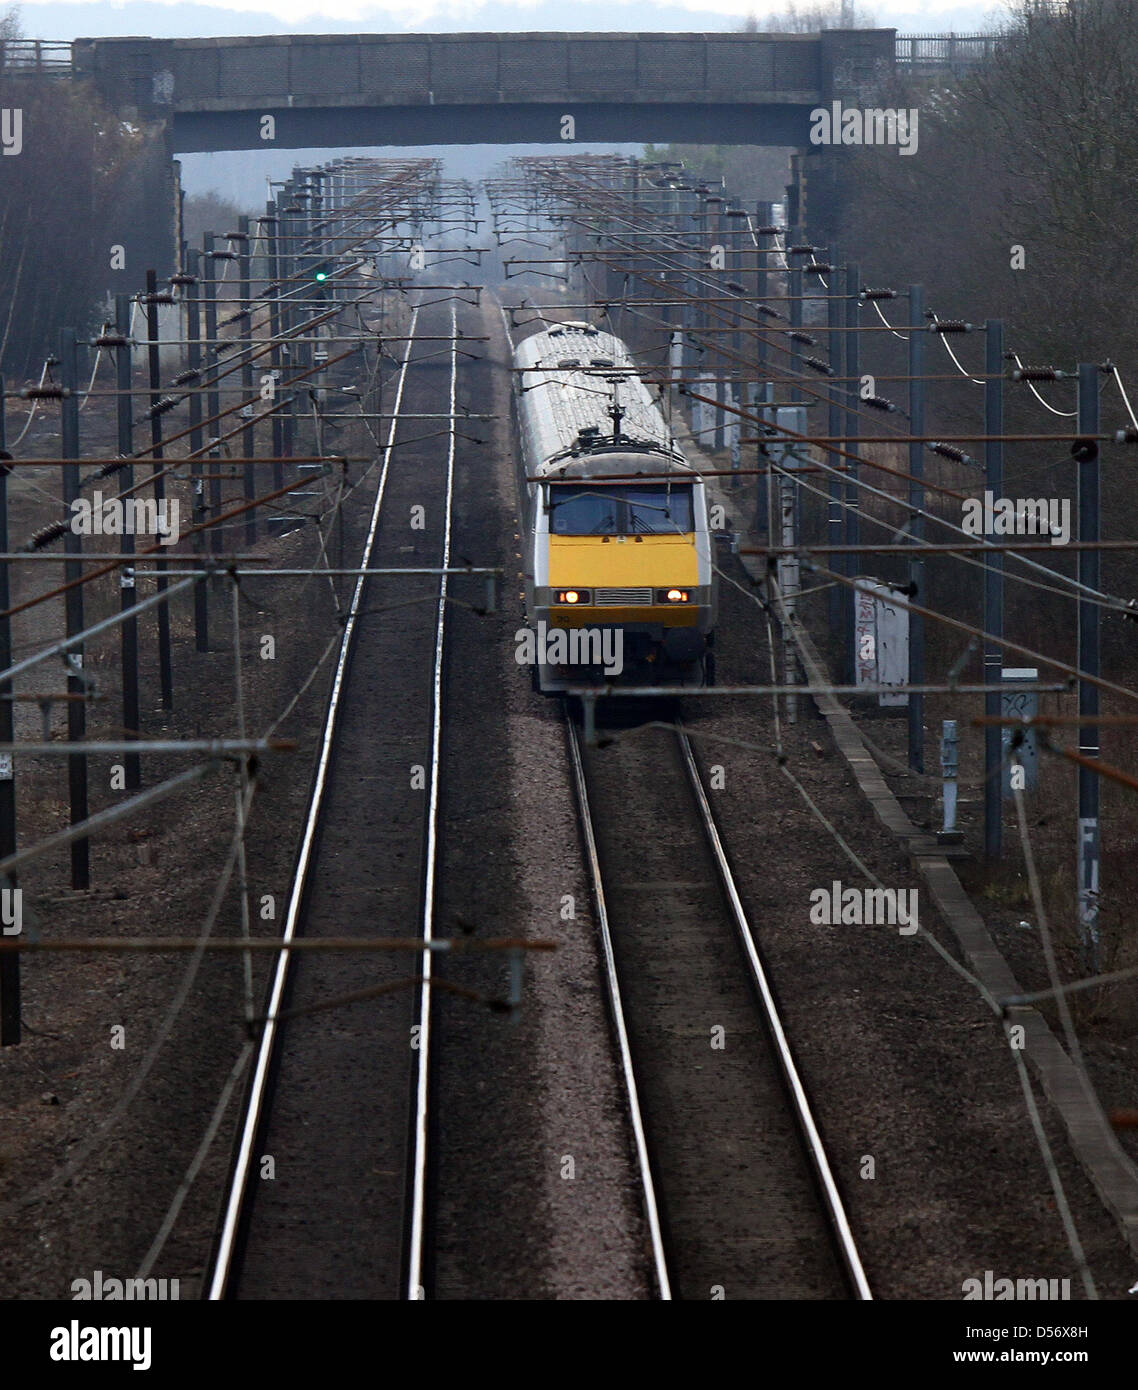 Peterborough, Cambridgeshire, UK. 26th March 2013. An East Coast train travels on the East Coast mainline near Peterborough, Cambridgeshire. The East Coast franchise is expected to be back in private hands in under two years after plans announced today. The Department of Transport have controlled it since November 2009 when it was previously run by National Express. The East Coast runs from London Kings Cross to Edinburgh, continuing on to Inverness and Aberdeen, Scotland. Pic: Paul Marriott Photography. Credit: Paul Marriott / Alamy Live News Stock Photo